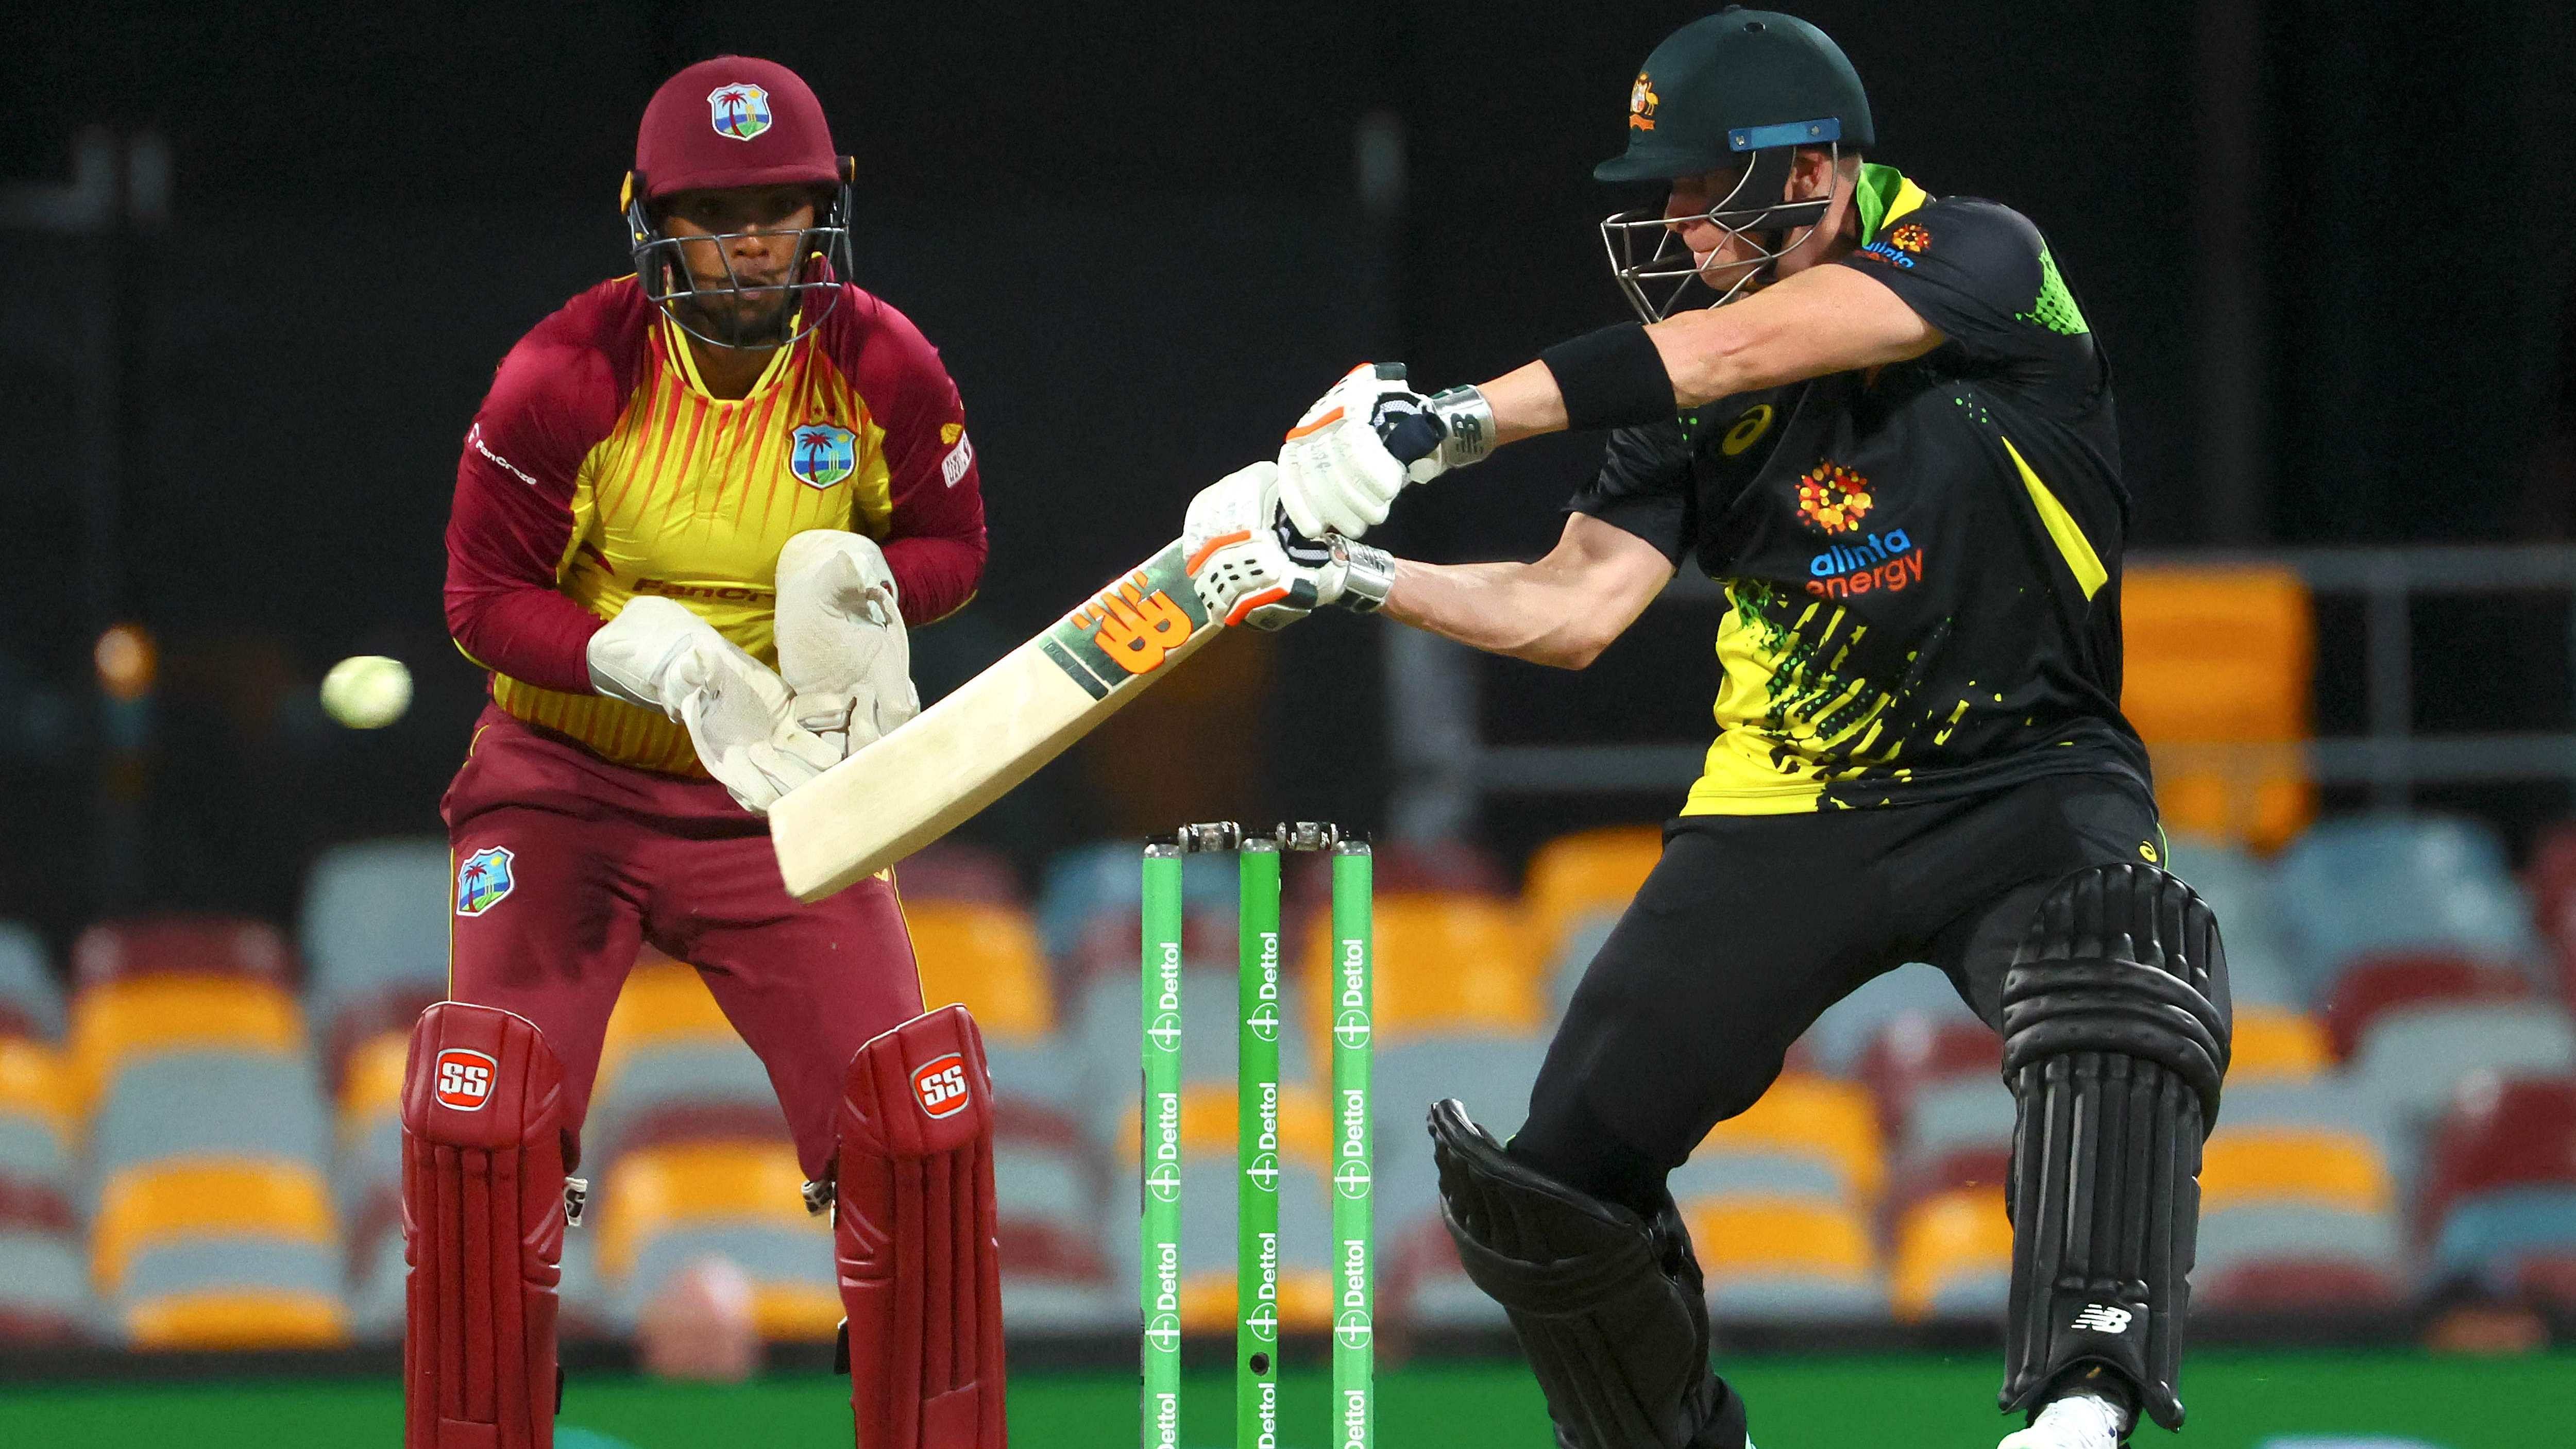 Australia's Steve Smith plays a shot watched by the West Indies wicketkeeper Nicholas Pooran. Credit: AFP Photo